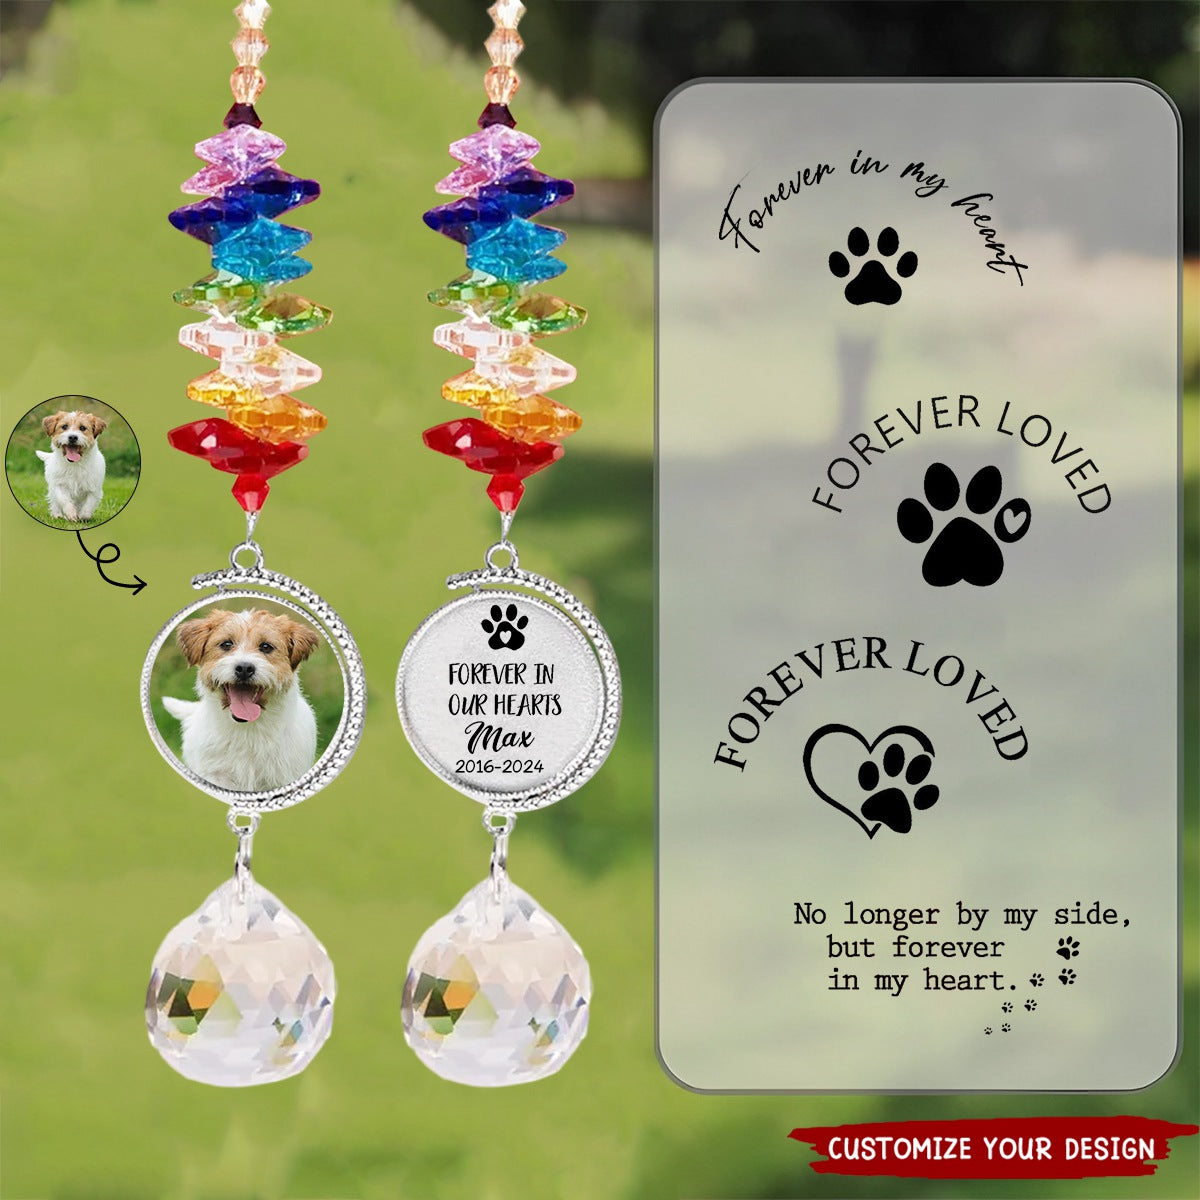 Forever in our hearts-Personalized Pet Memorial Sun Catcher with Photo